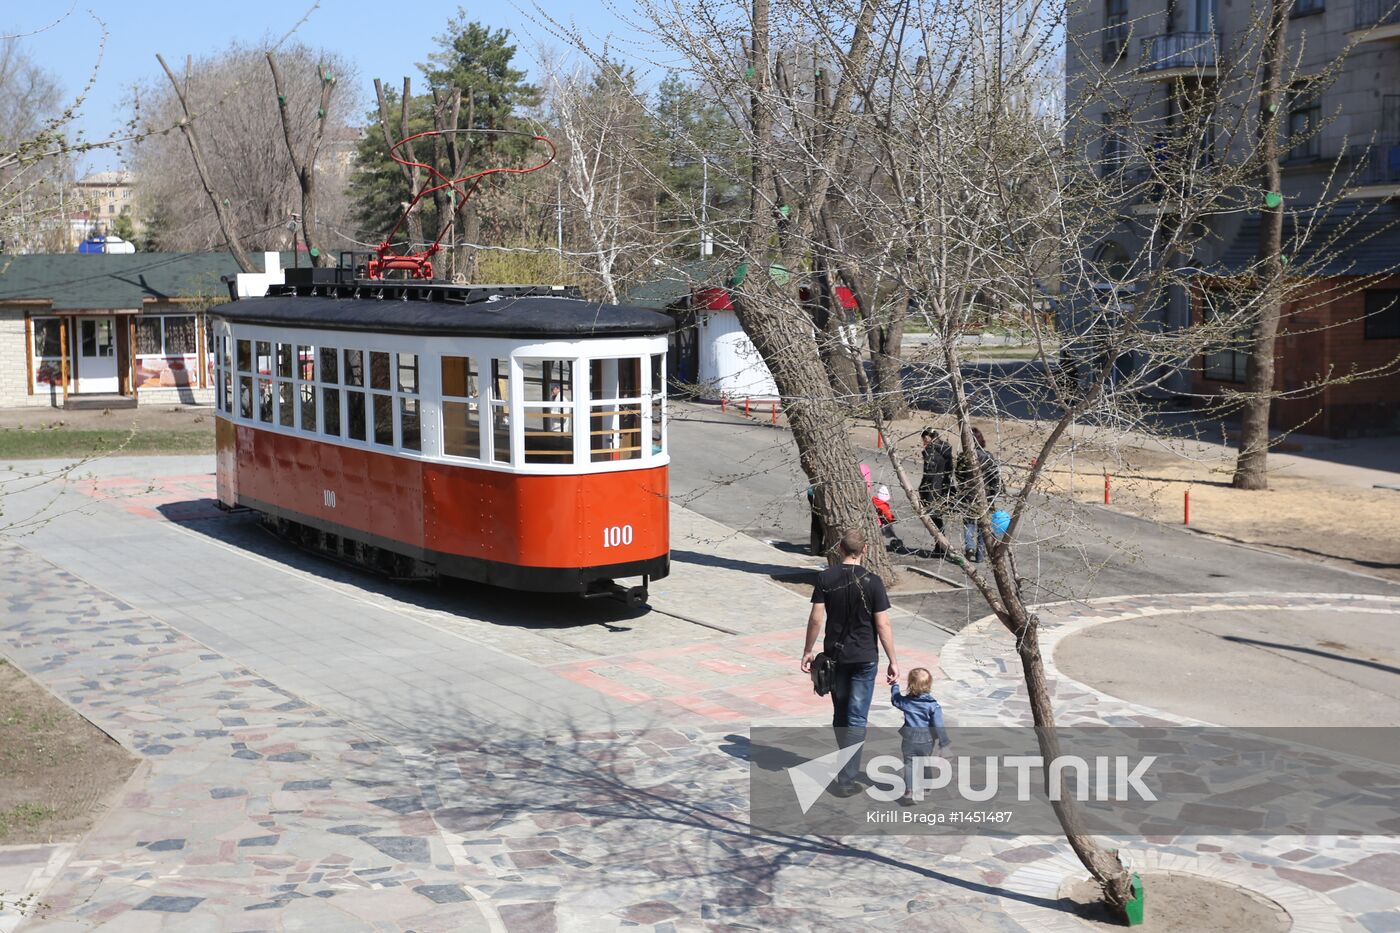 Tramway monument opened in Volgograd